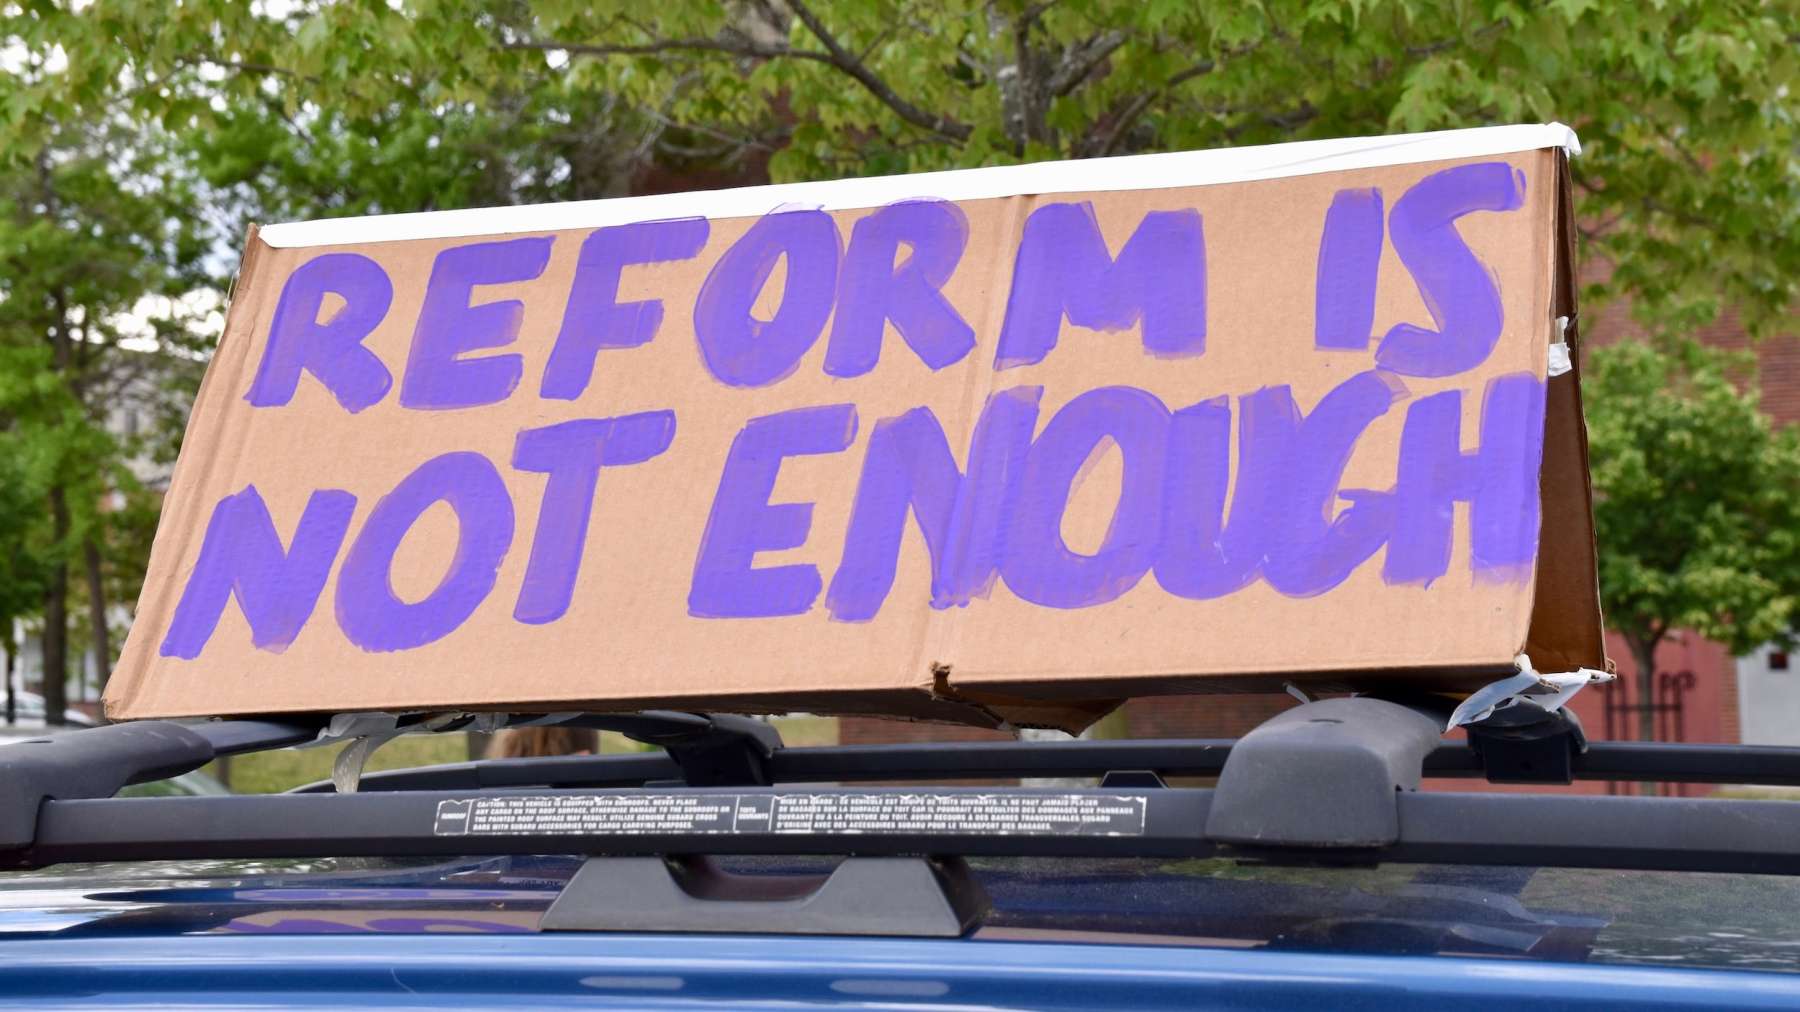 Previous reform attempts have not made serious change: Why we must Defund the Police